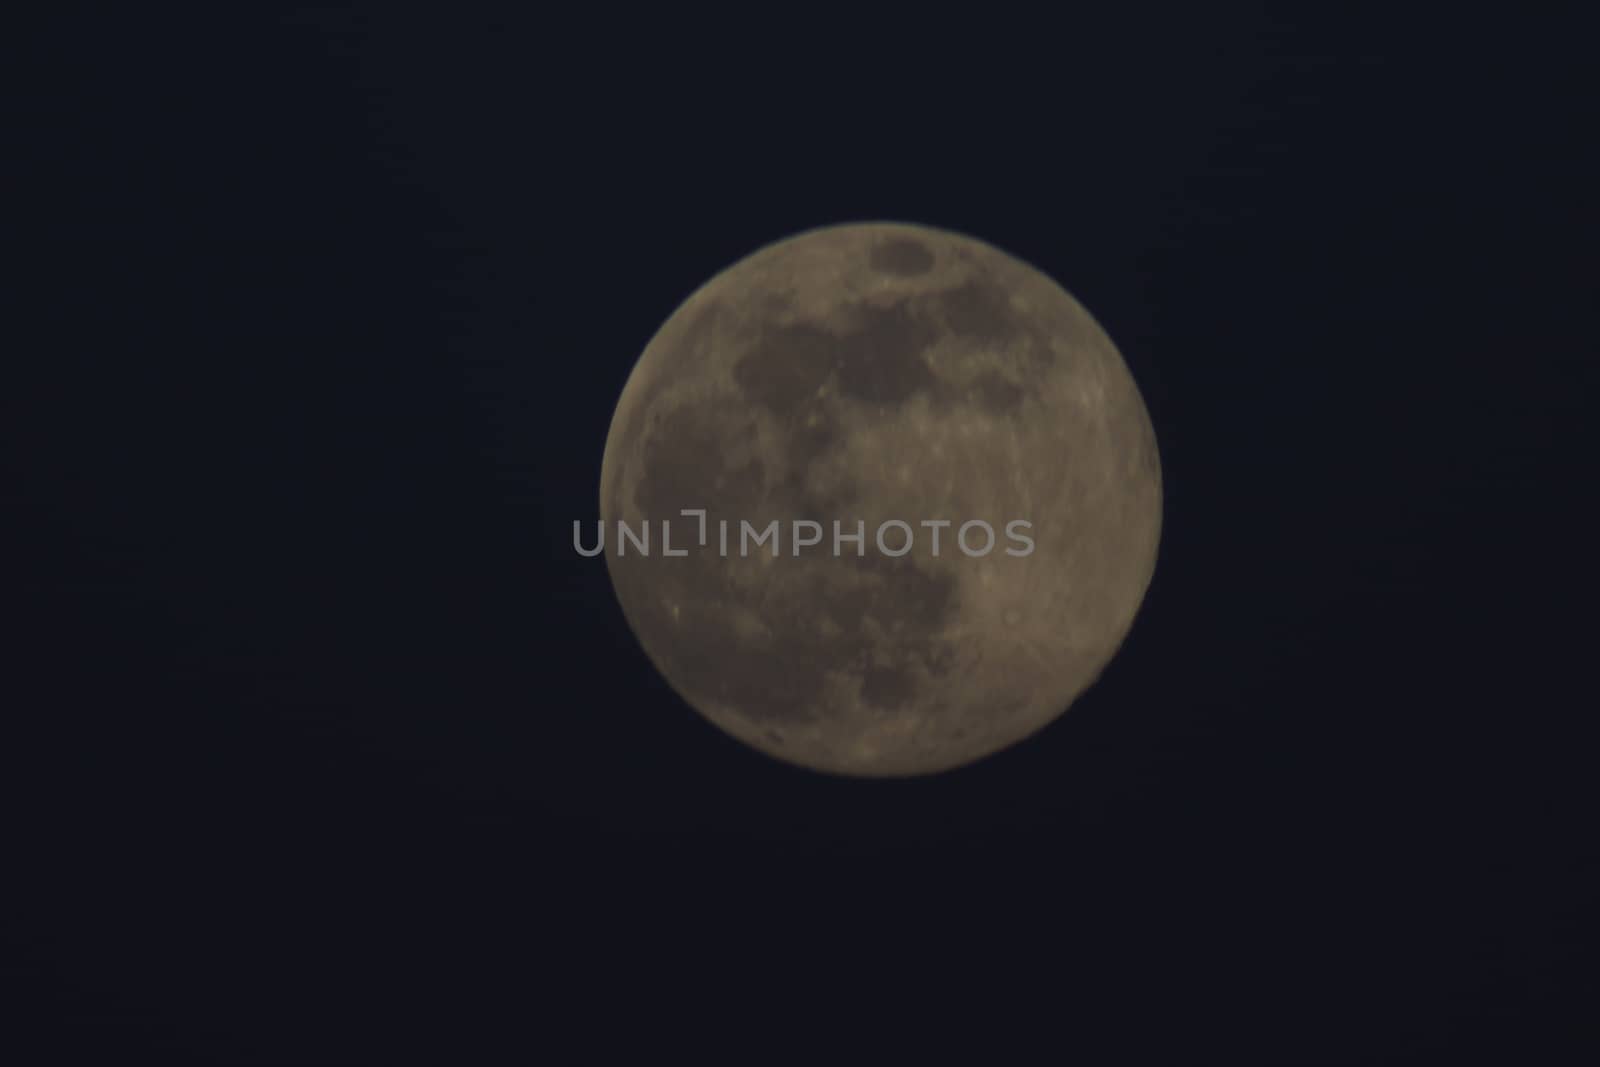 My first close-up pictures of a celestial body with a telephoto lens